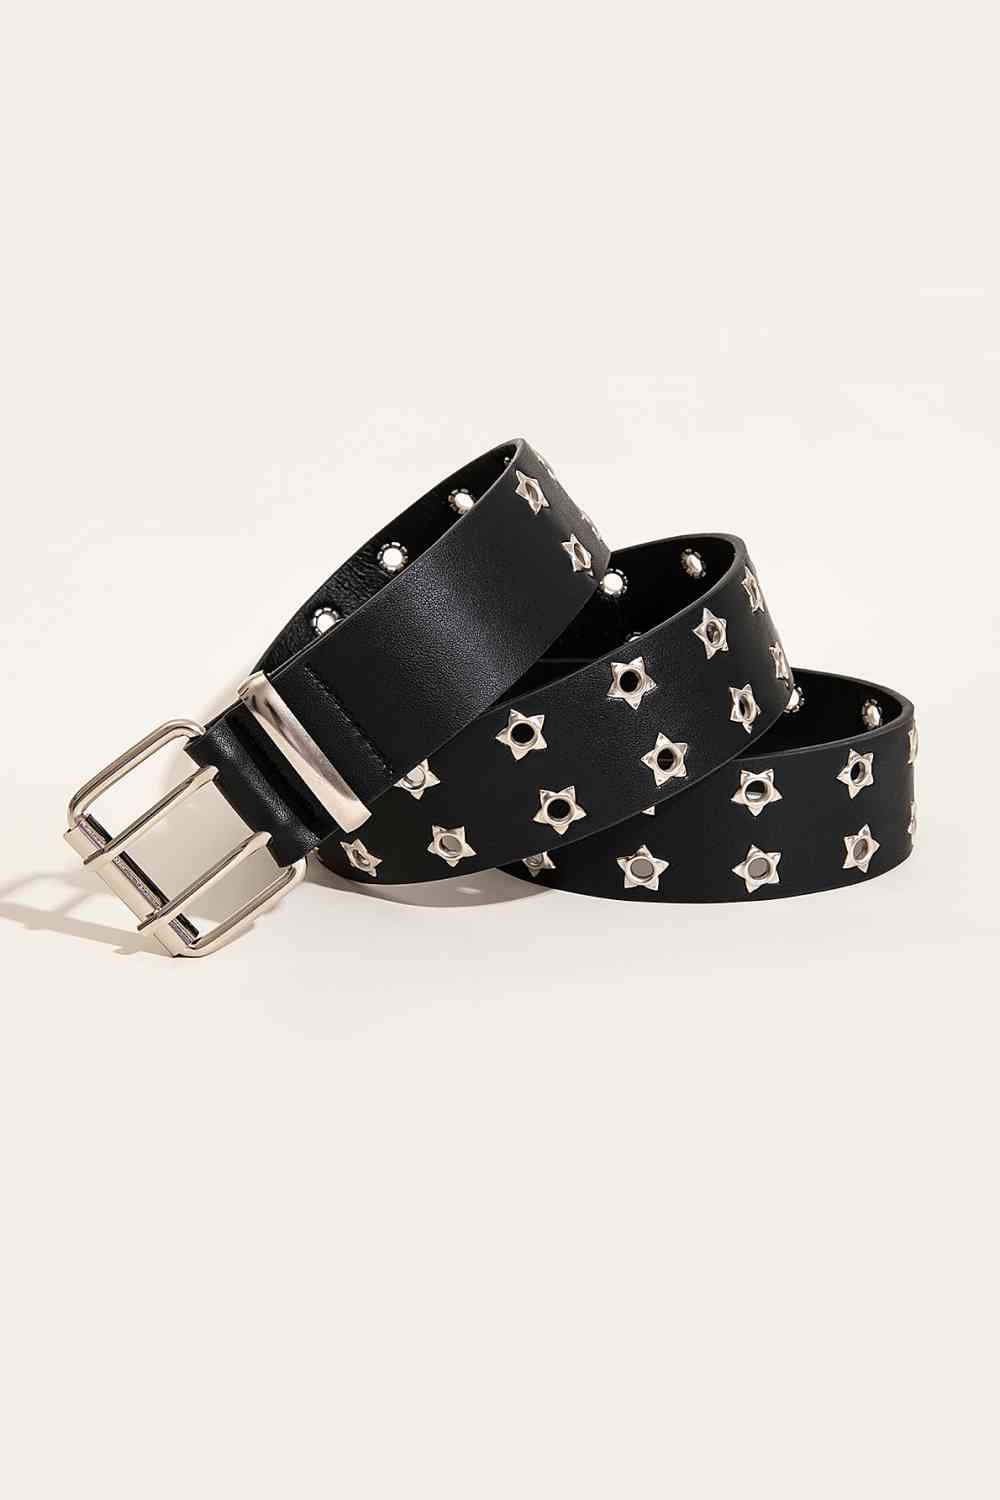 White Smoke Double Row Star Grommet PU Leather Belt Sentient Beauty Fashions Apparel &amp; Accessories